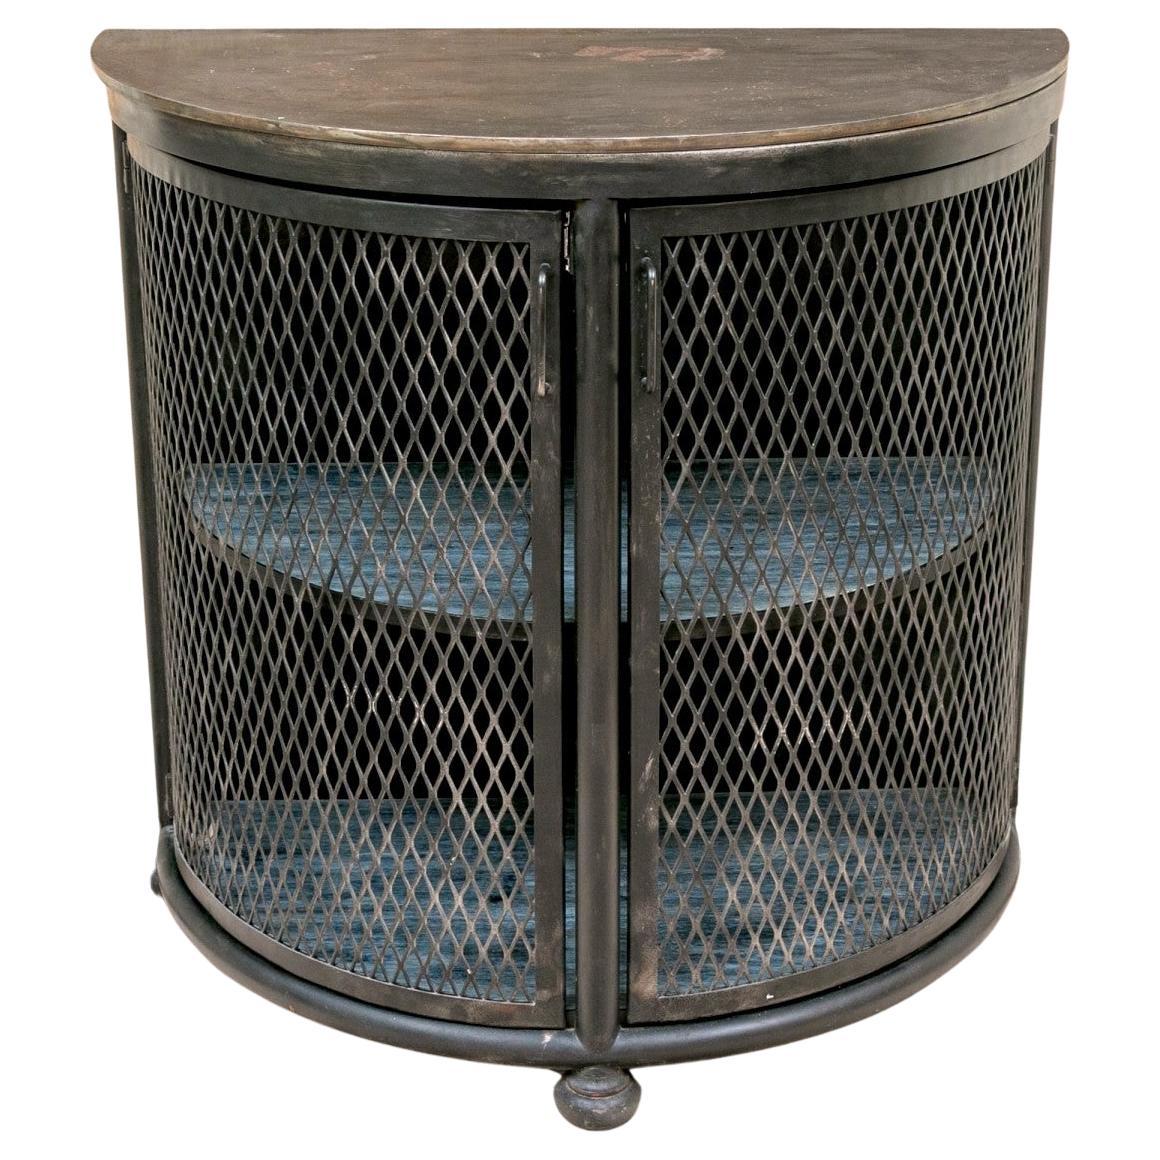 Stunning Custom Steel Demi-Lune Cabinet or console with mesh doors, two interior wood shelves and three bun feet.  The doors pull open to reveal the shelves. Unique piece that can be mixed with a variety of decors.  
Industrial chic with a French